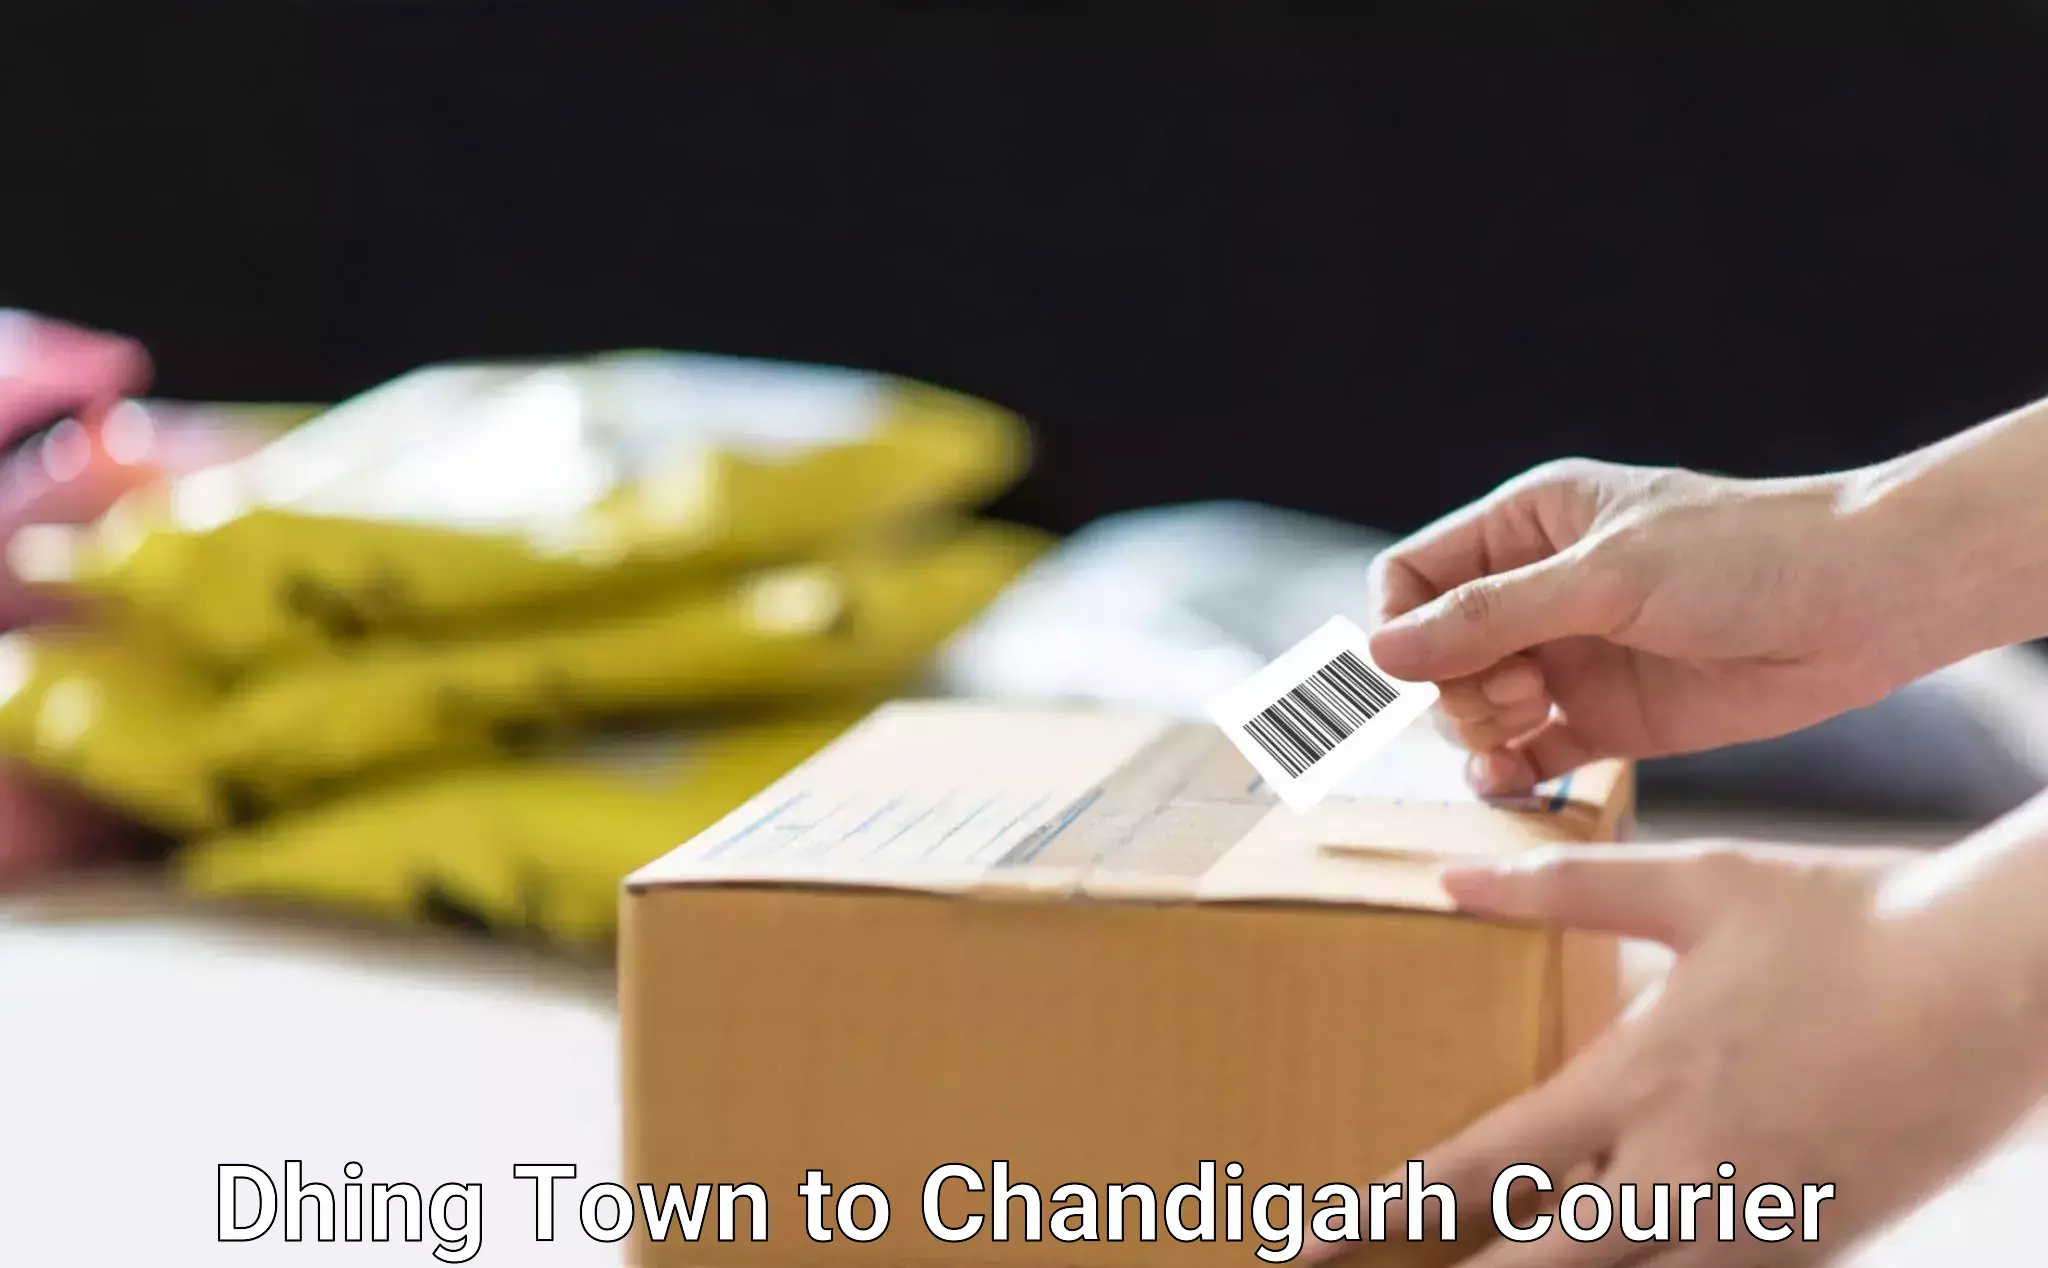 User-friendly courier app Dhing Town to Chandigarh